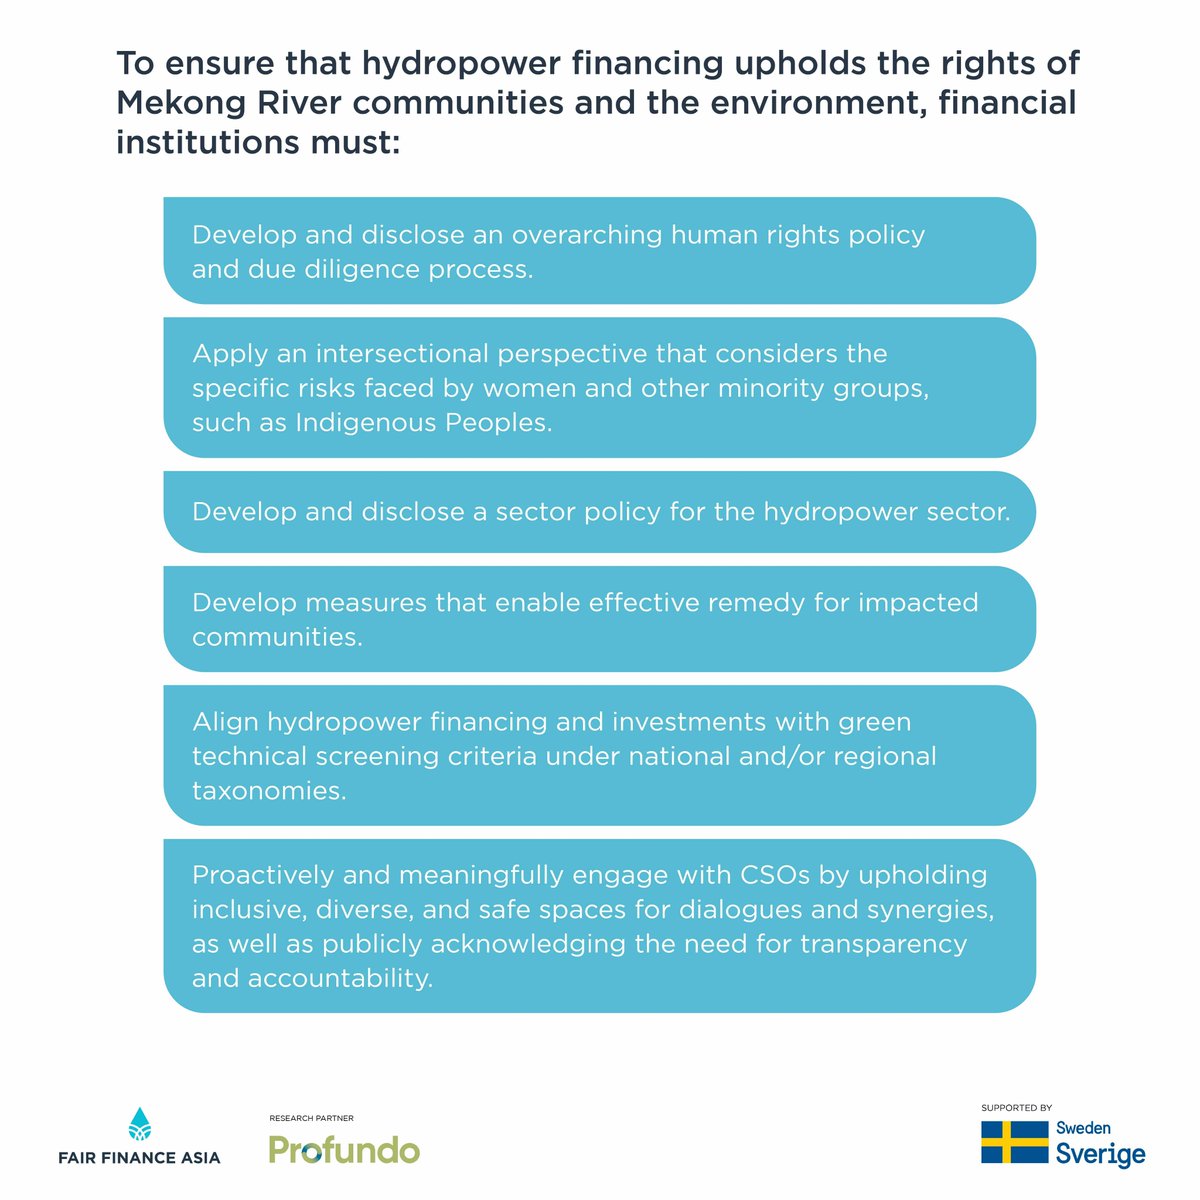 Due to their lending and investment power, #financialinstitutions are in a key position to ensure that #hydropower projects in the #Mekong region uphold the #humanrights of communities #women & the environment.

FFA's new report outlines what FIs can do: bit.ly/4acJ8xv